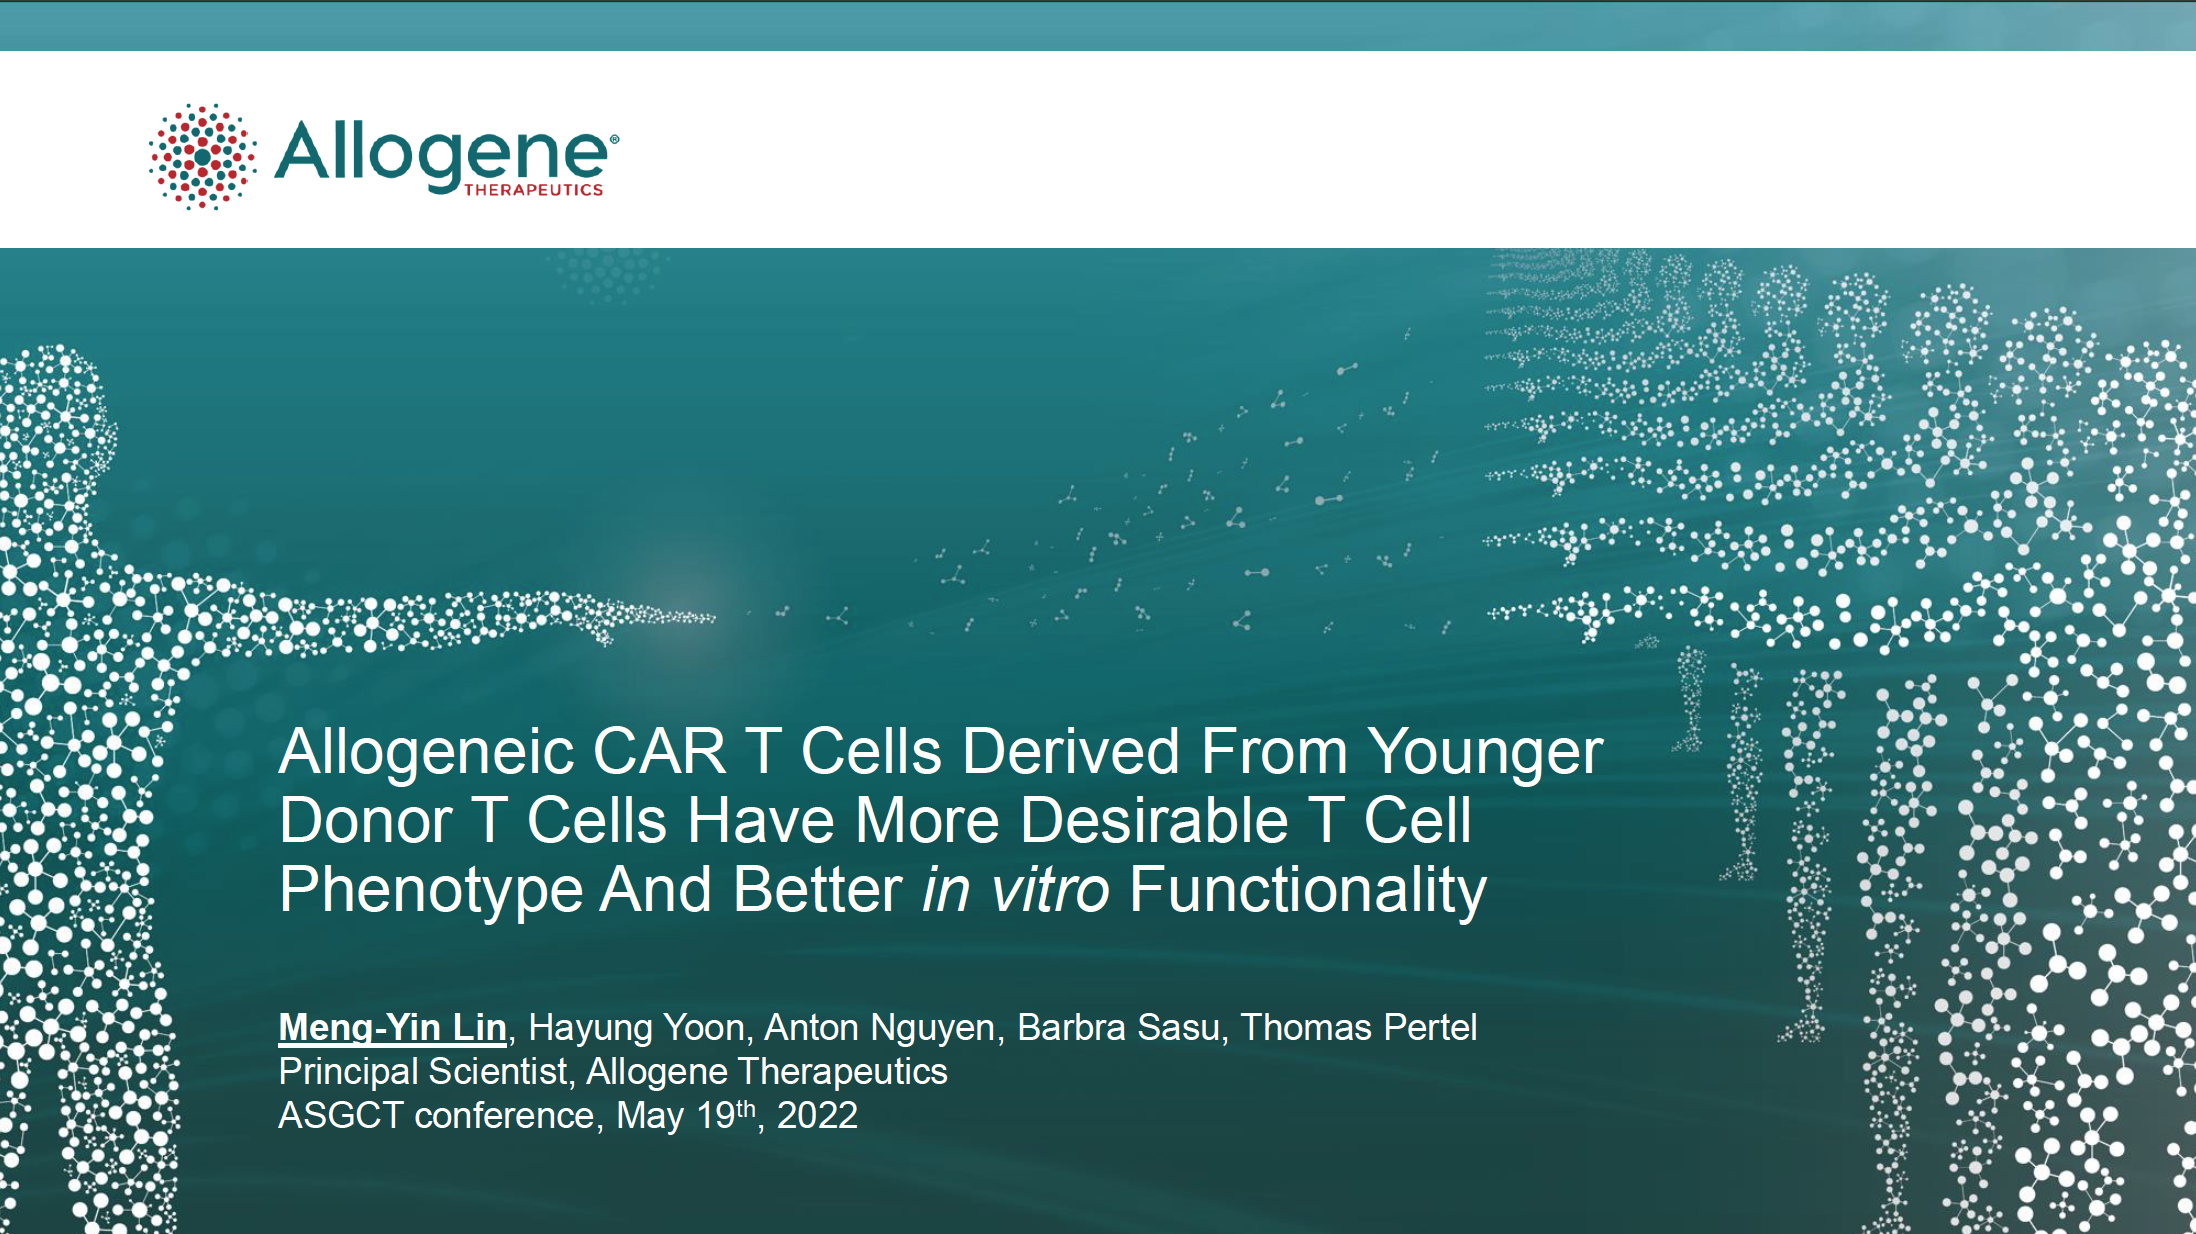 Allogeneic CAR T Cells Derived From Younger Donor T Cells Have More Desirable T Cell Phenotype And Better in vitro Functionality